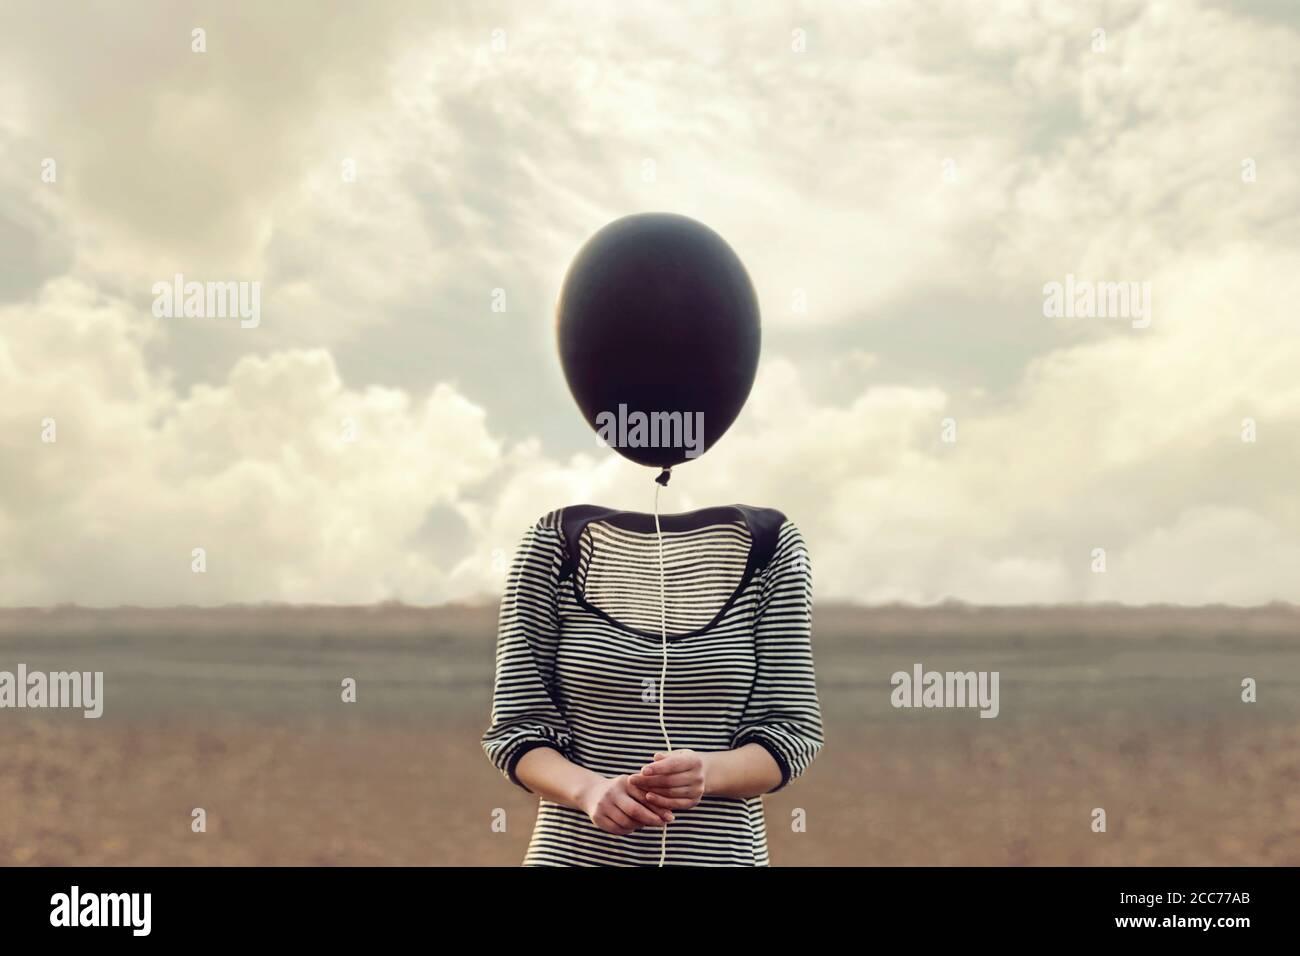 woman's head replaced by a black balloon Stock Photo